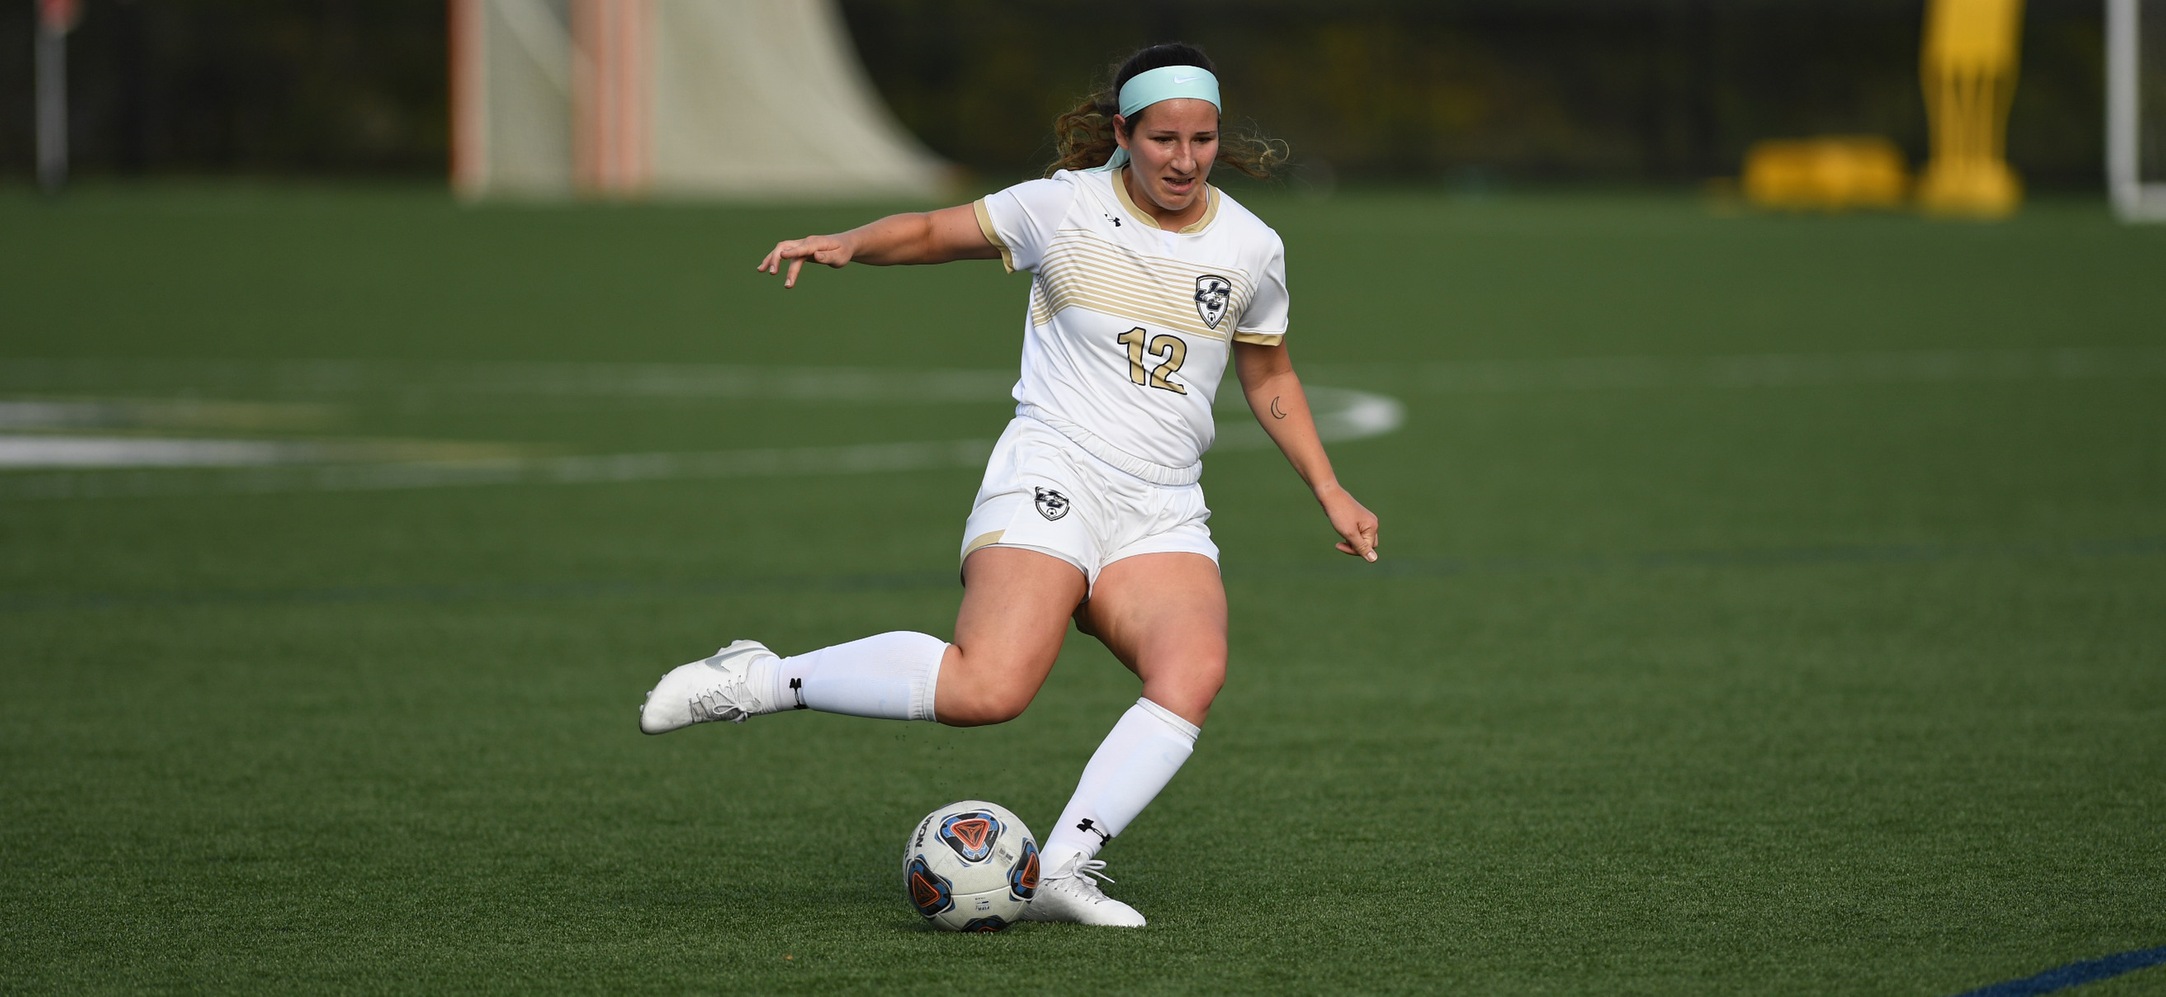 Emma Moreland assisted both goals in the Eagles, 2-1 win over Penn College.